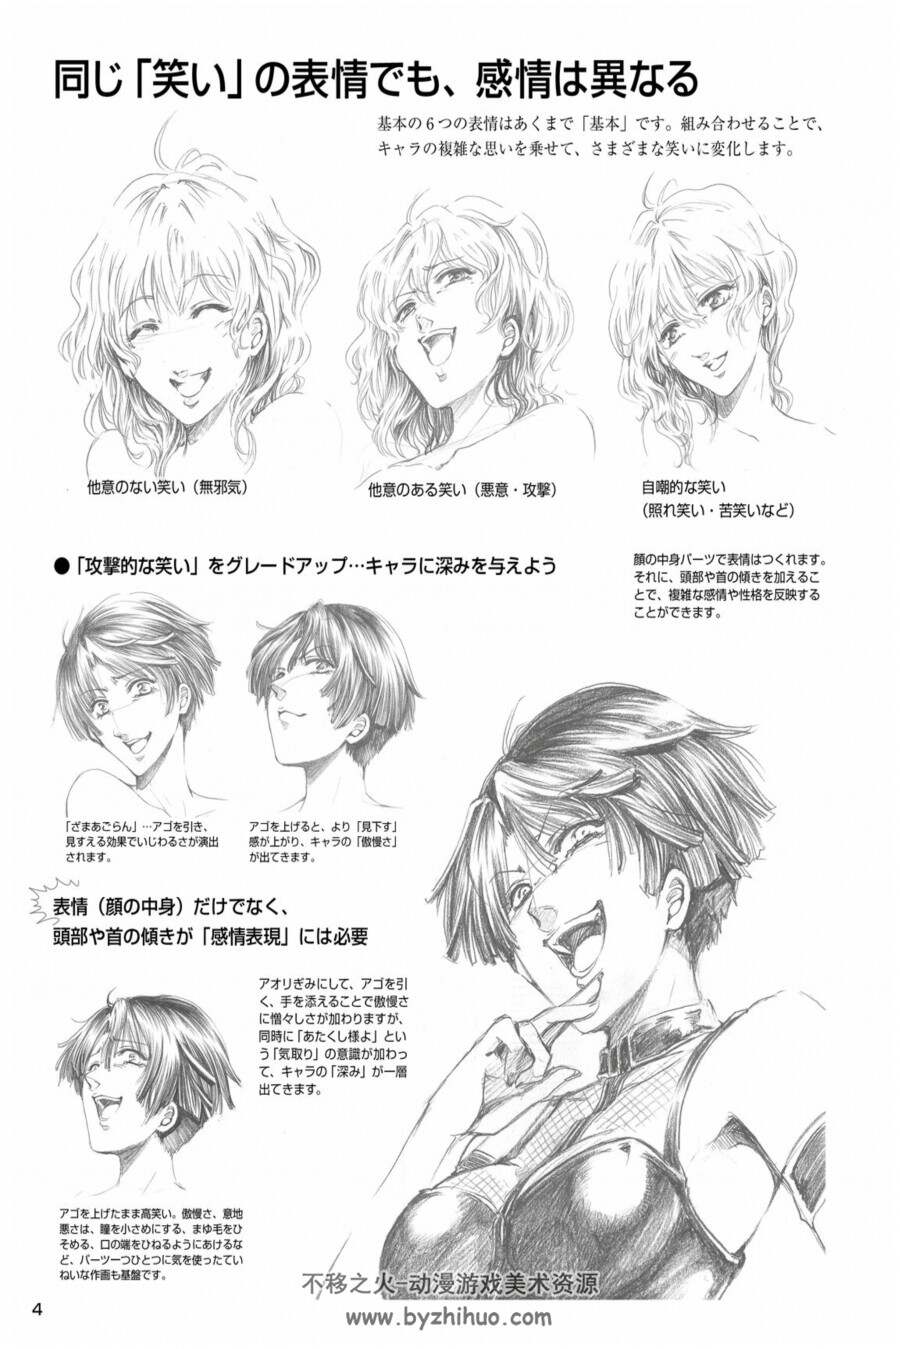 How to draw feelings of the characters 如何画出角色的情感 百度网盘下载